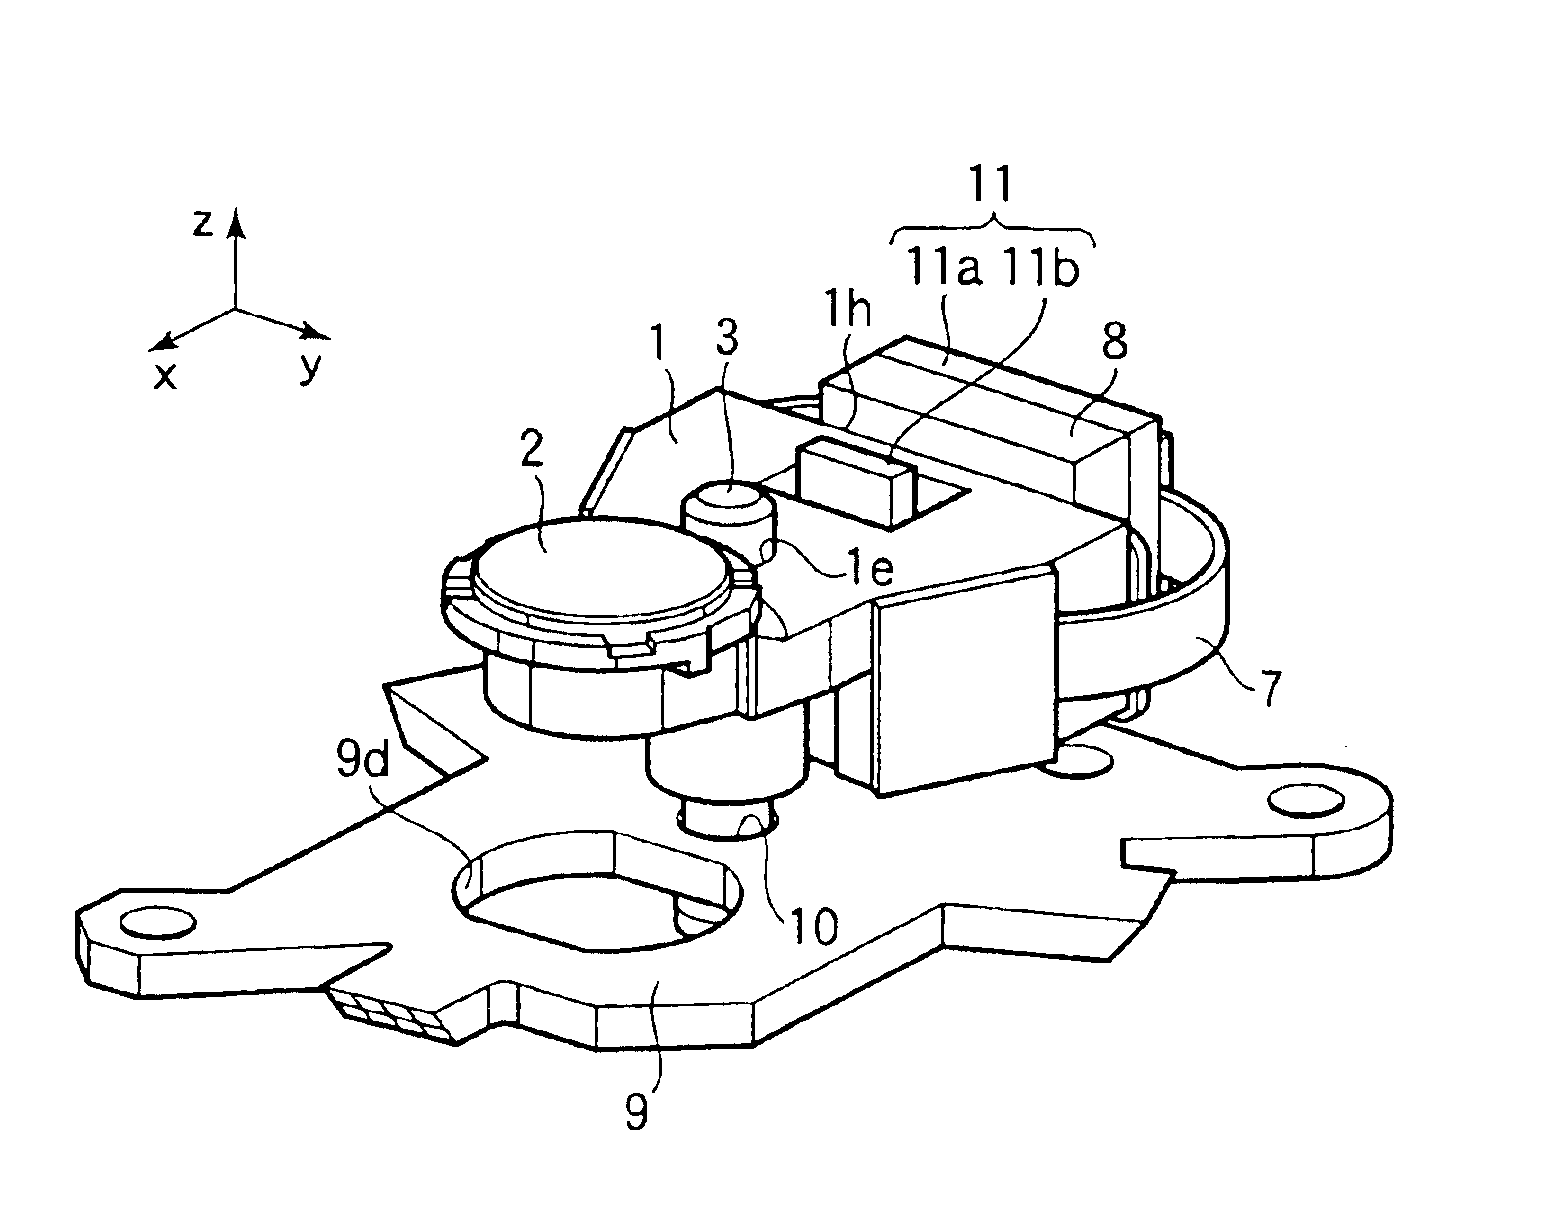 Objective lens driving apparatus